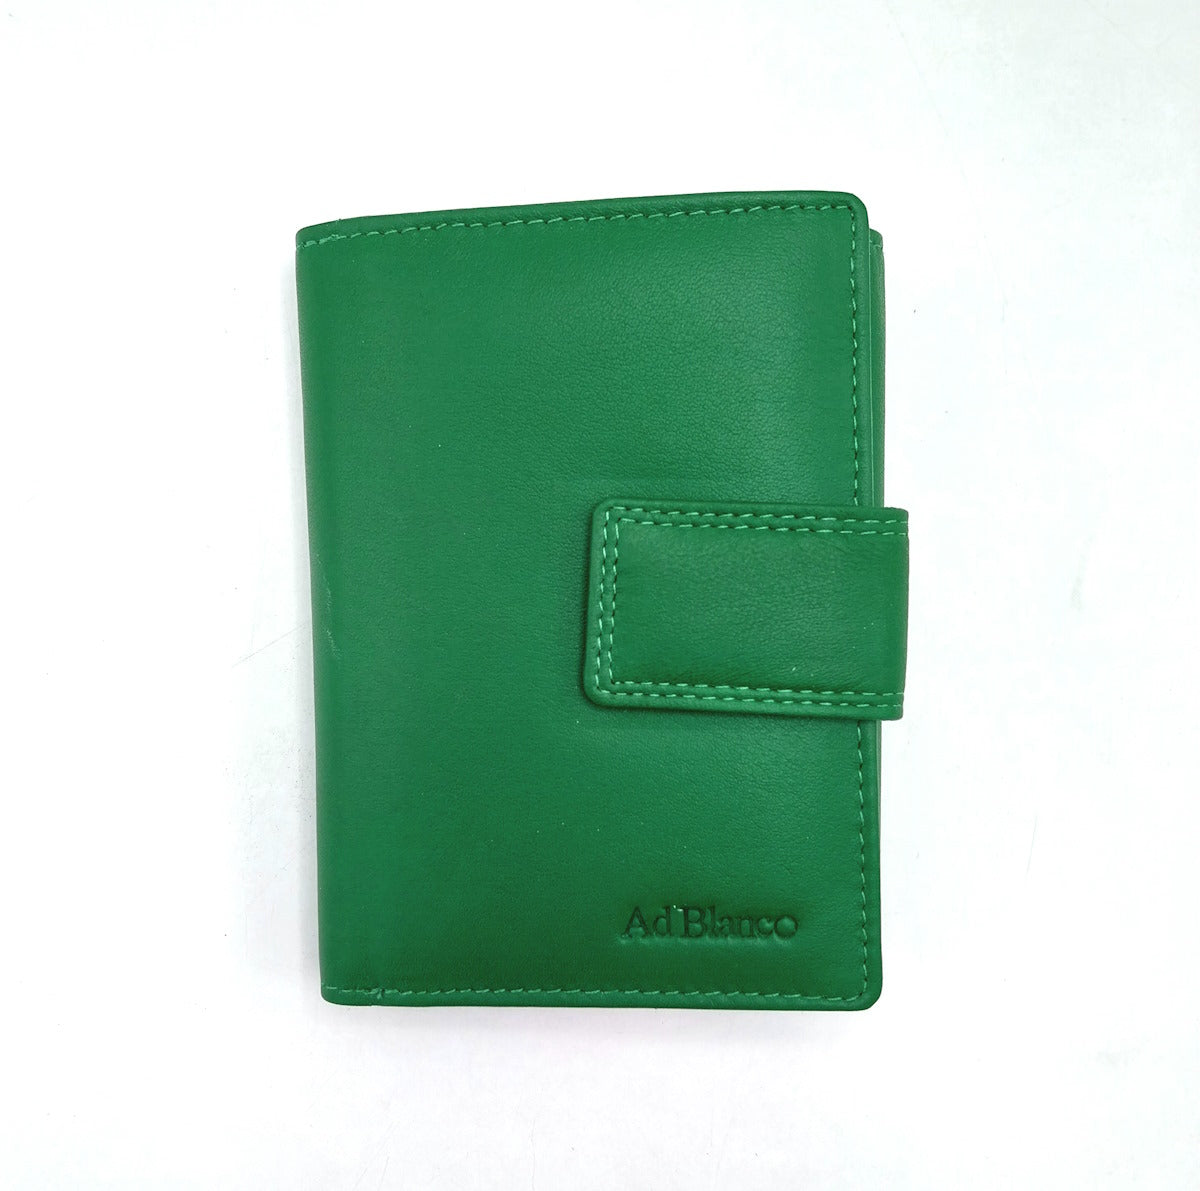 Genuine leather wallet, Ad Blanco, art. 6773.422